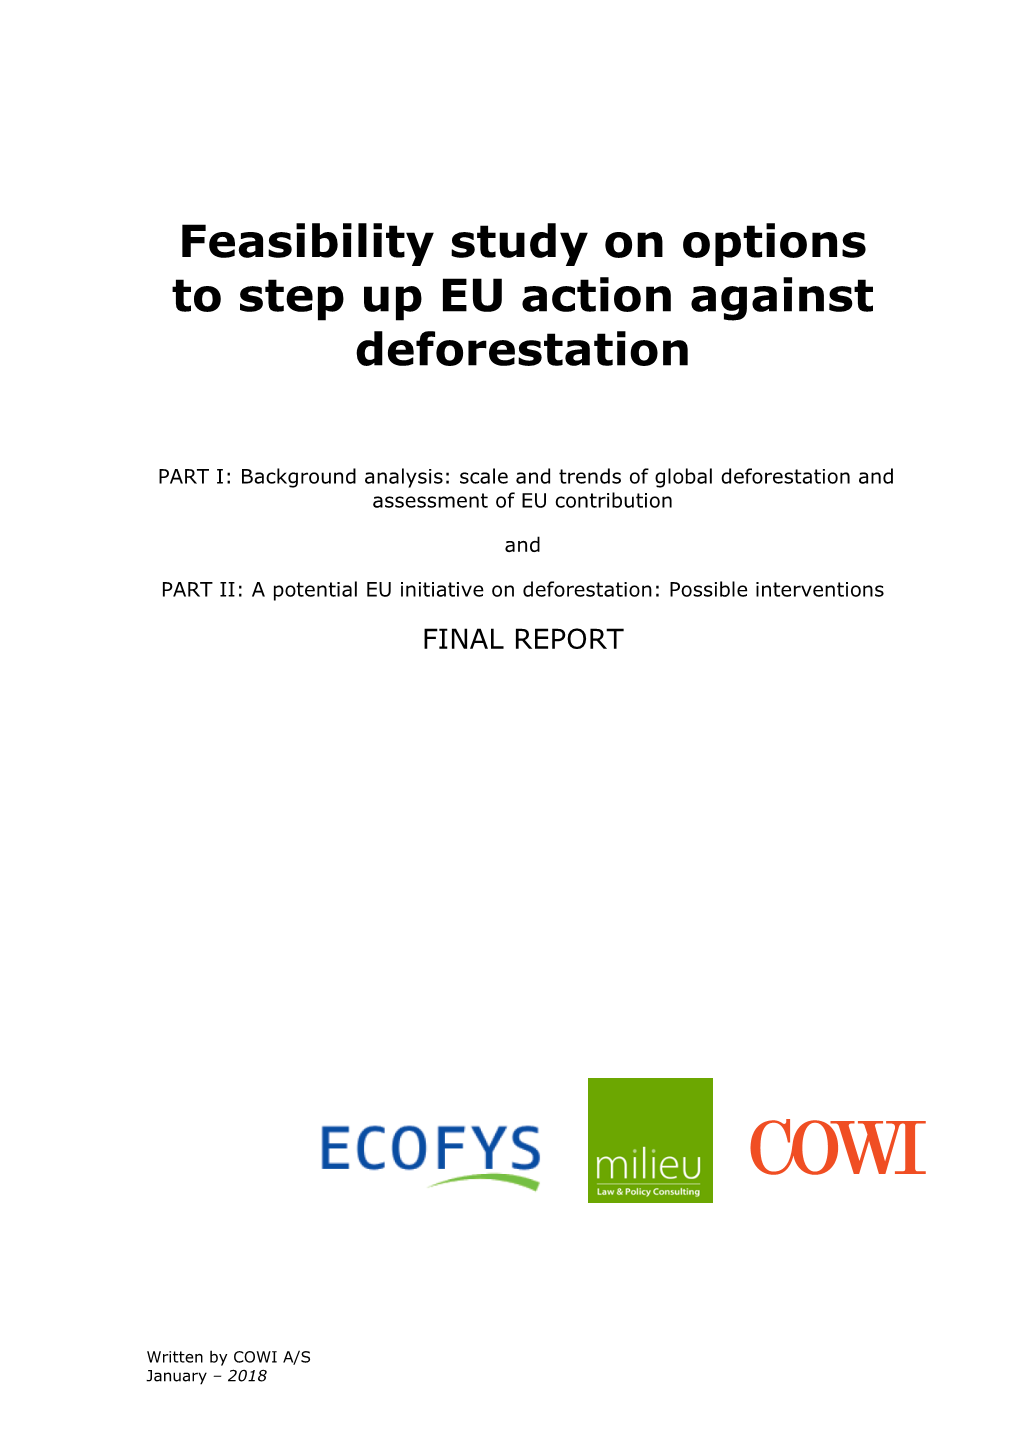 Feasibility Study on Options to Step up EU Action Against Deforestation